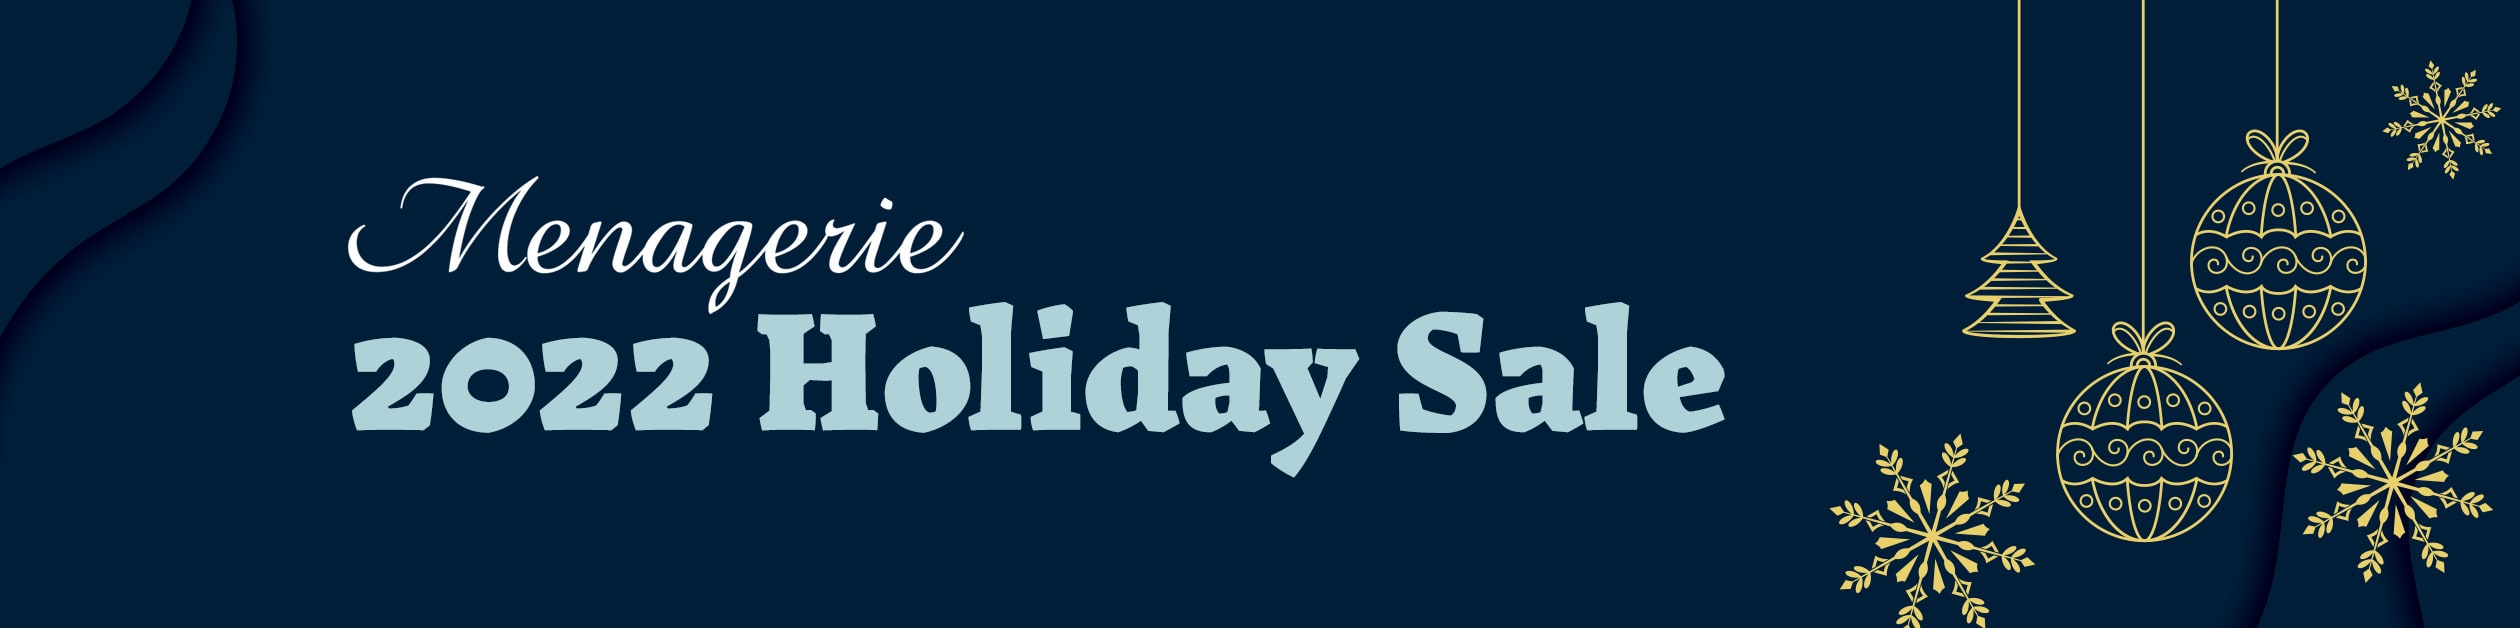 Announcing the 2022 Holiday Drapery Hardware Sale - Save 20% on Everything